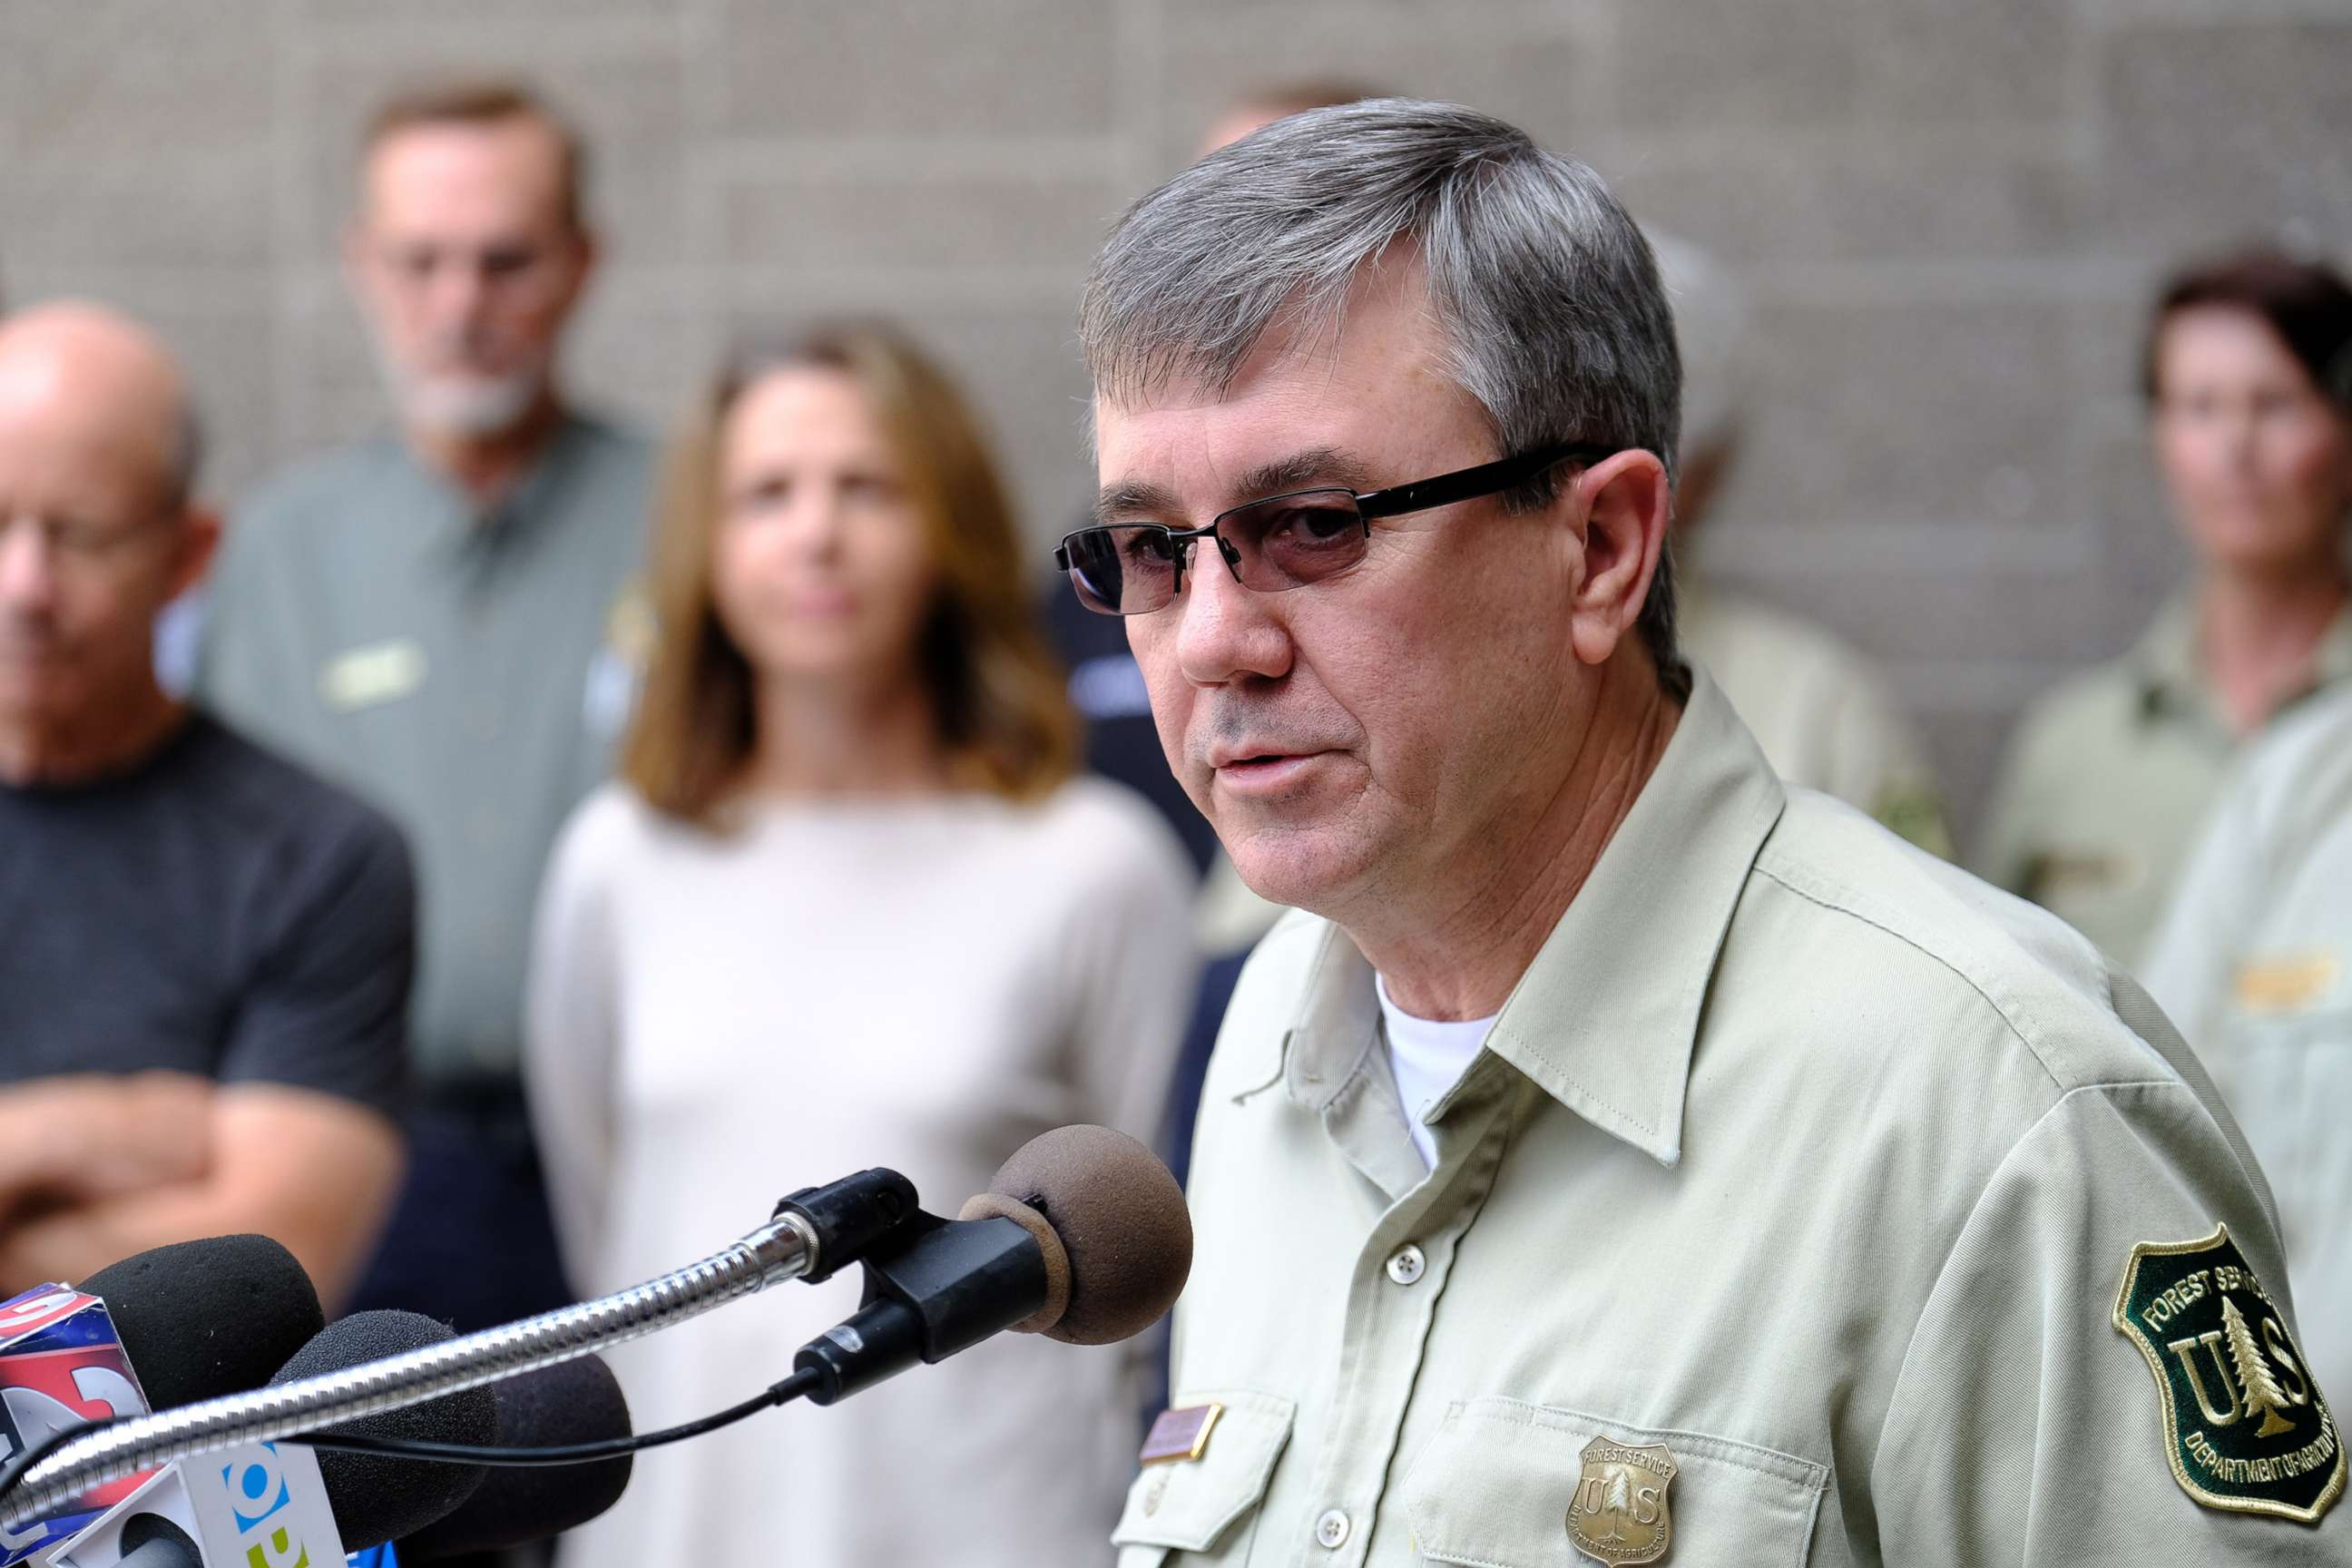 PHOTO: U.S. Forest Service Chief, Tony Tooke, speaks during a media briefing for the Eagle Creek Fire outside the Troutdale Policing Community Center in Troutdale, Ore., Sept. 9, 2017. 